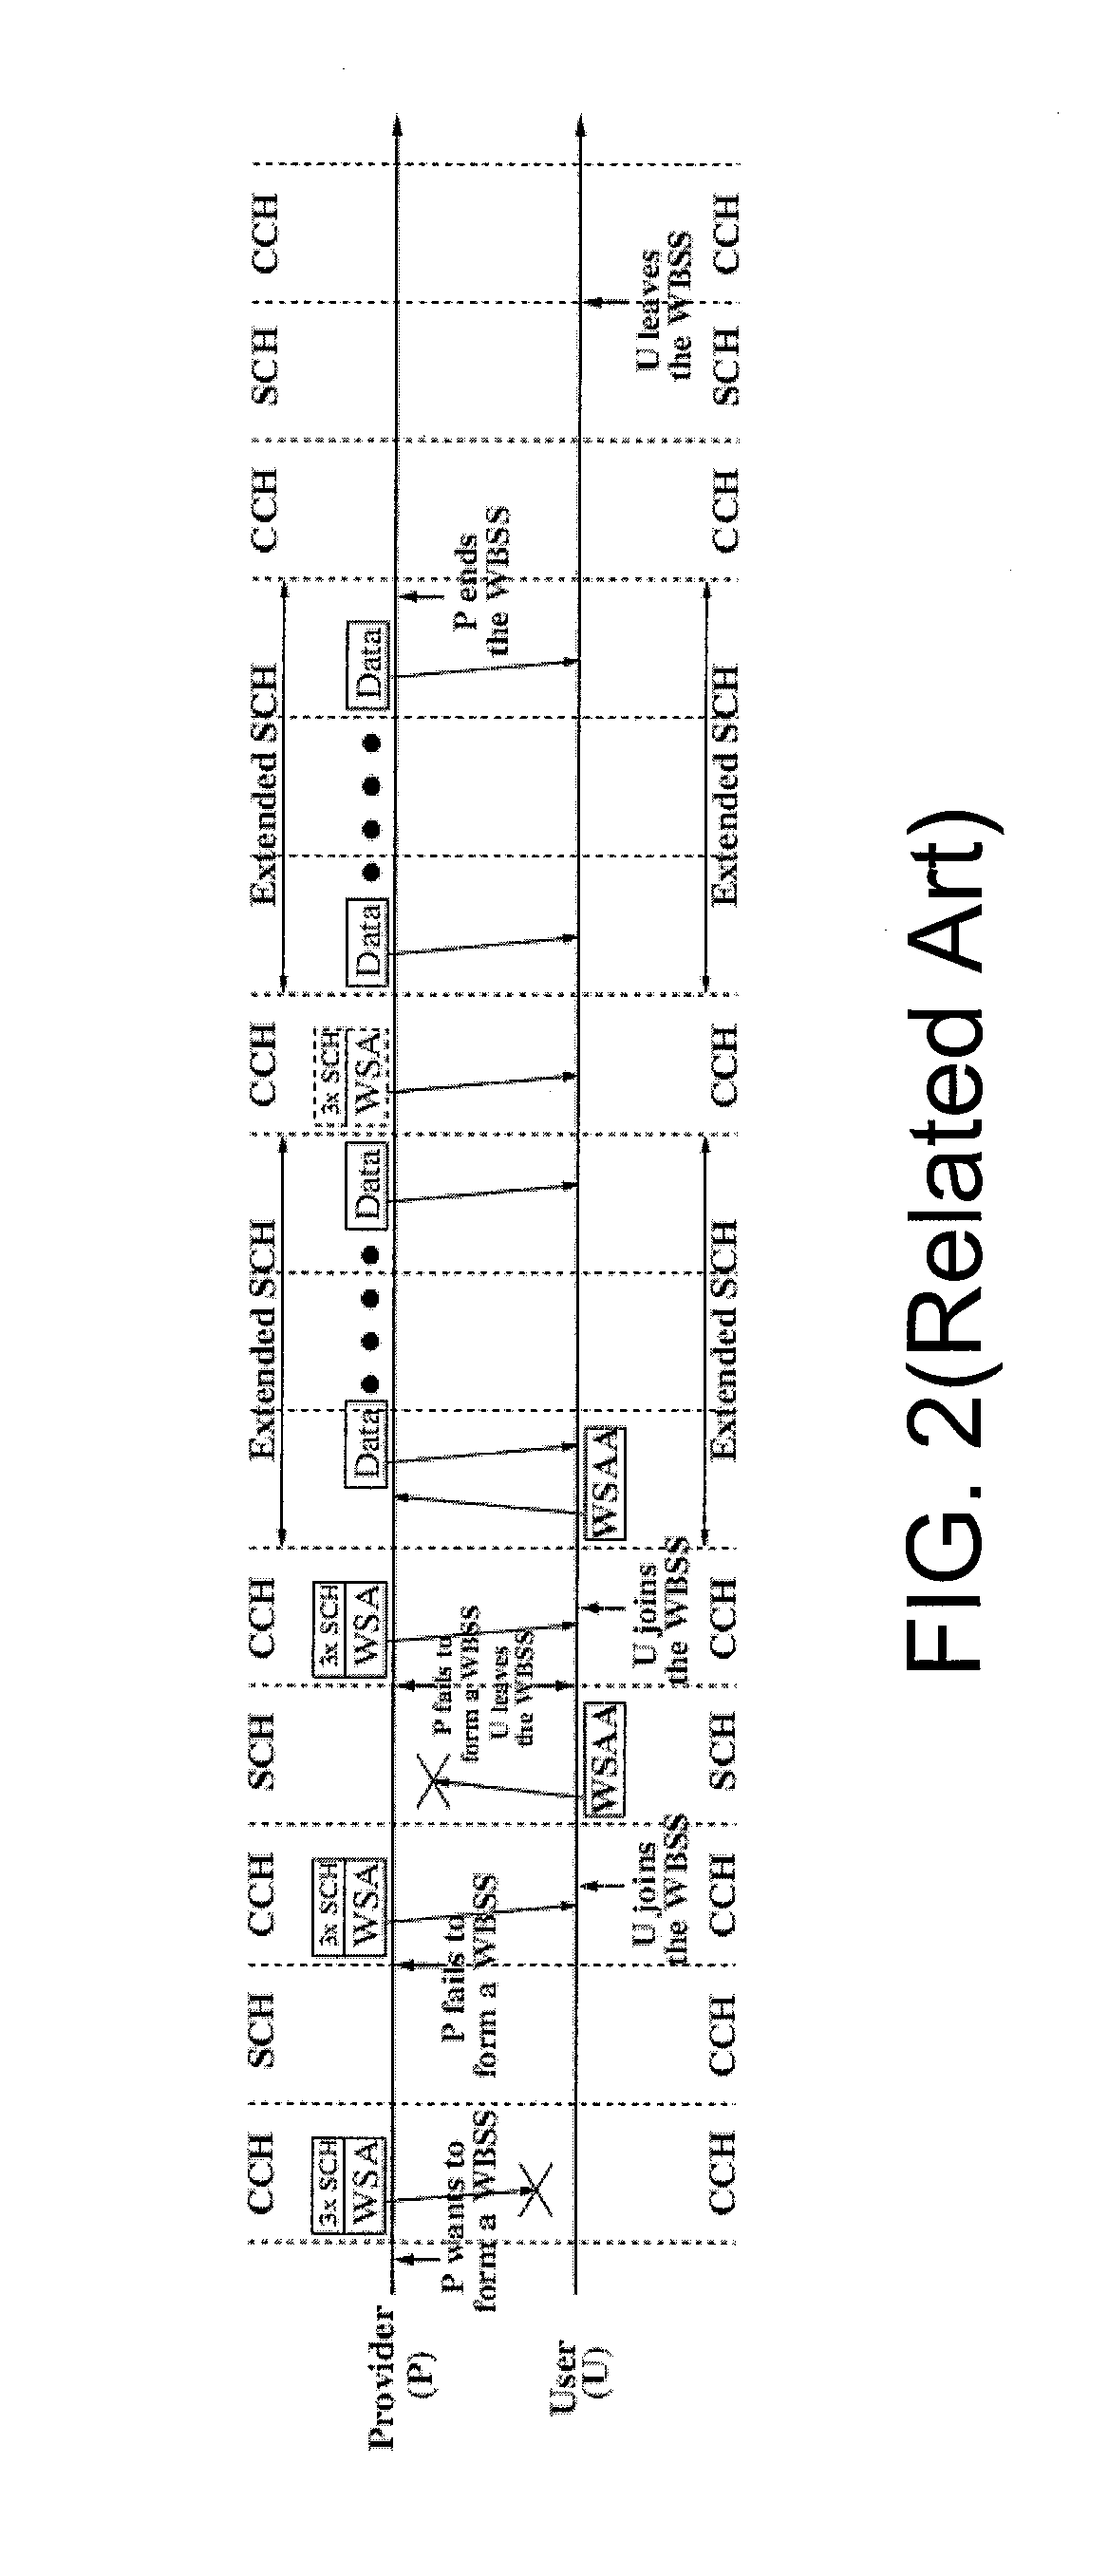 Method and system for extended service channel access on demand in an alternating wireless channel access environment